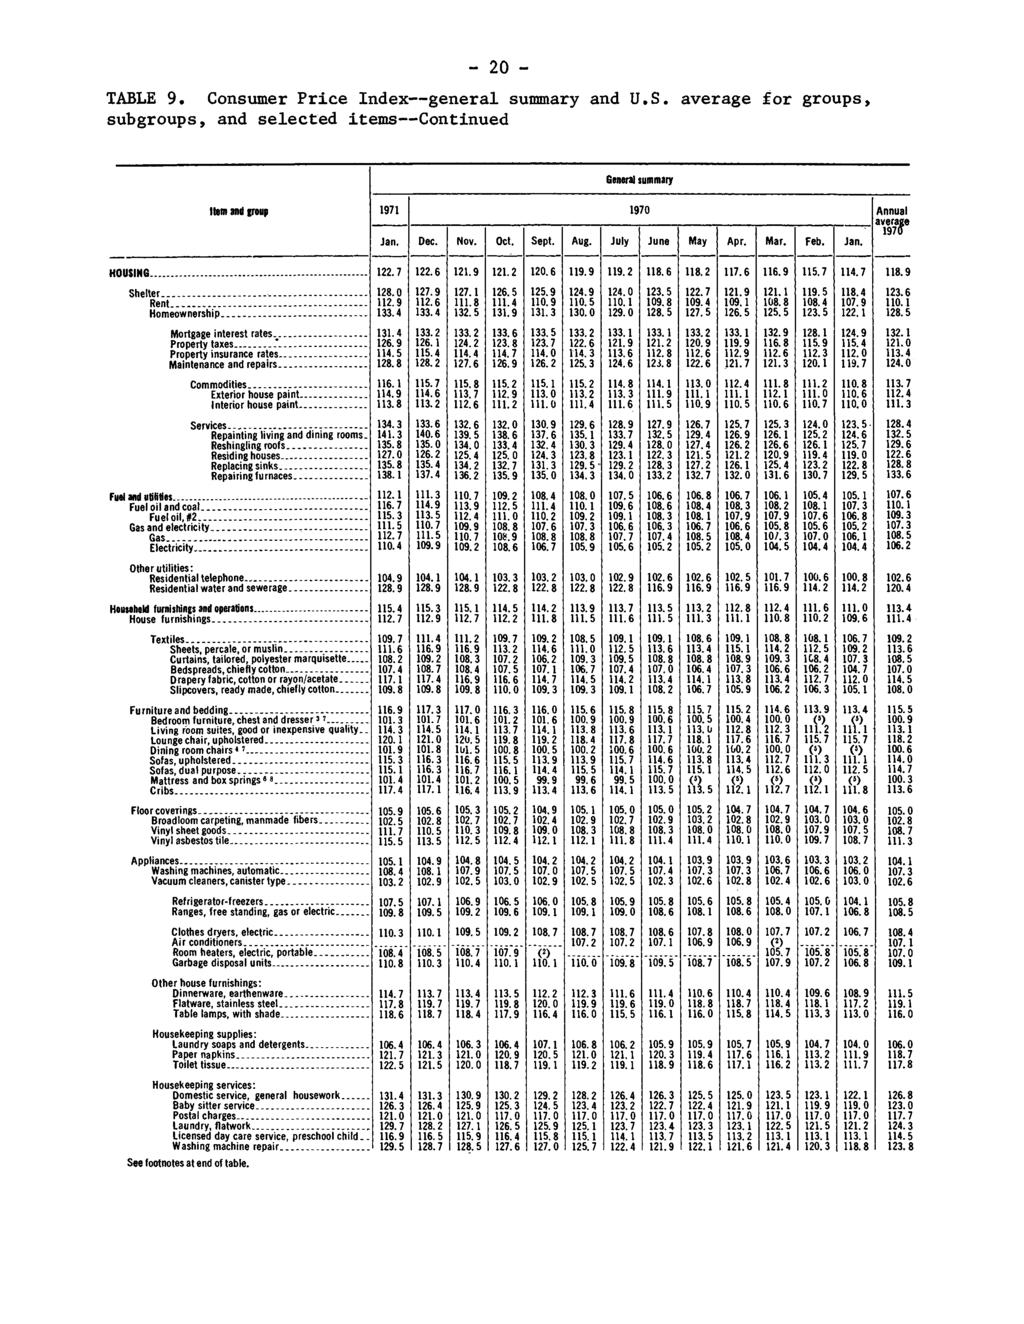 2 TABLE 9. Consumer Price Index general summary and U.S. average for groups, subgroups, and selected items Continued General summary Item and group 1971 197 Annual averai Jan. Dec. Nov. Oct. Sept.